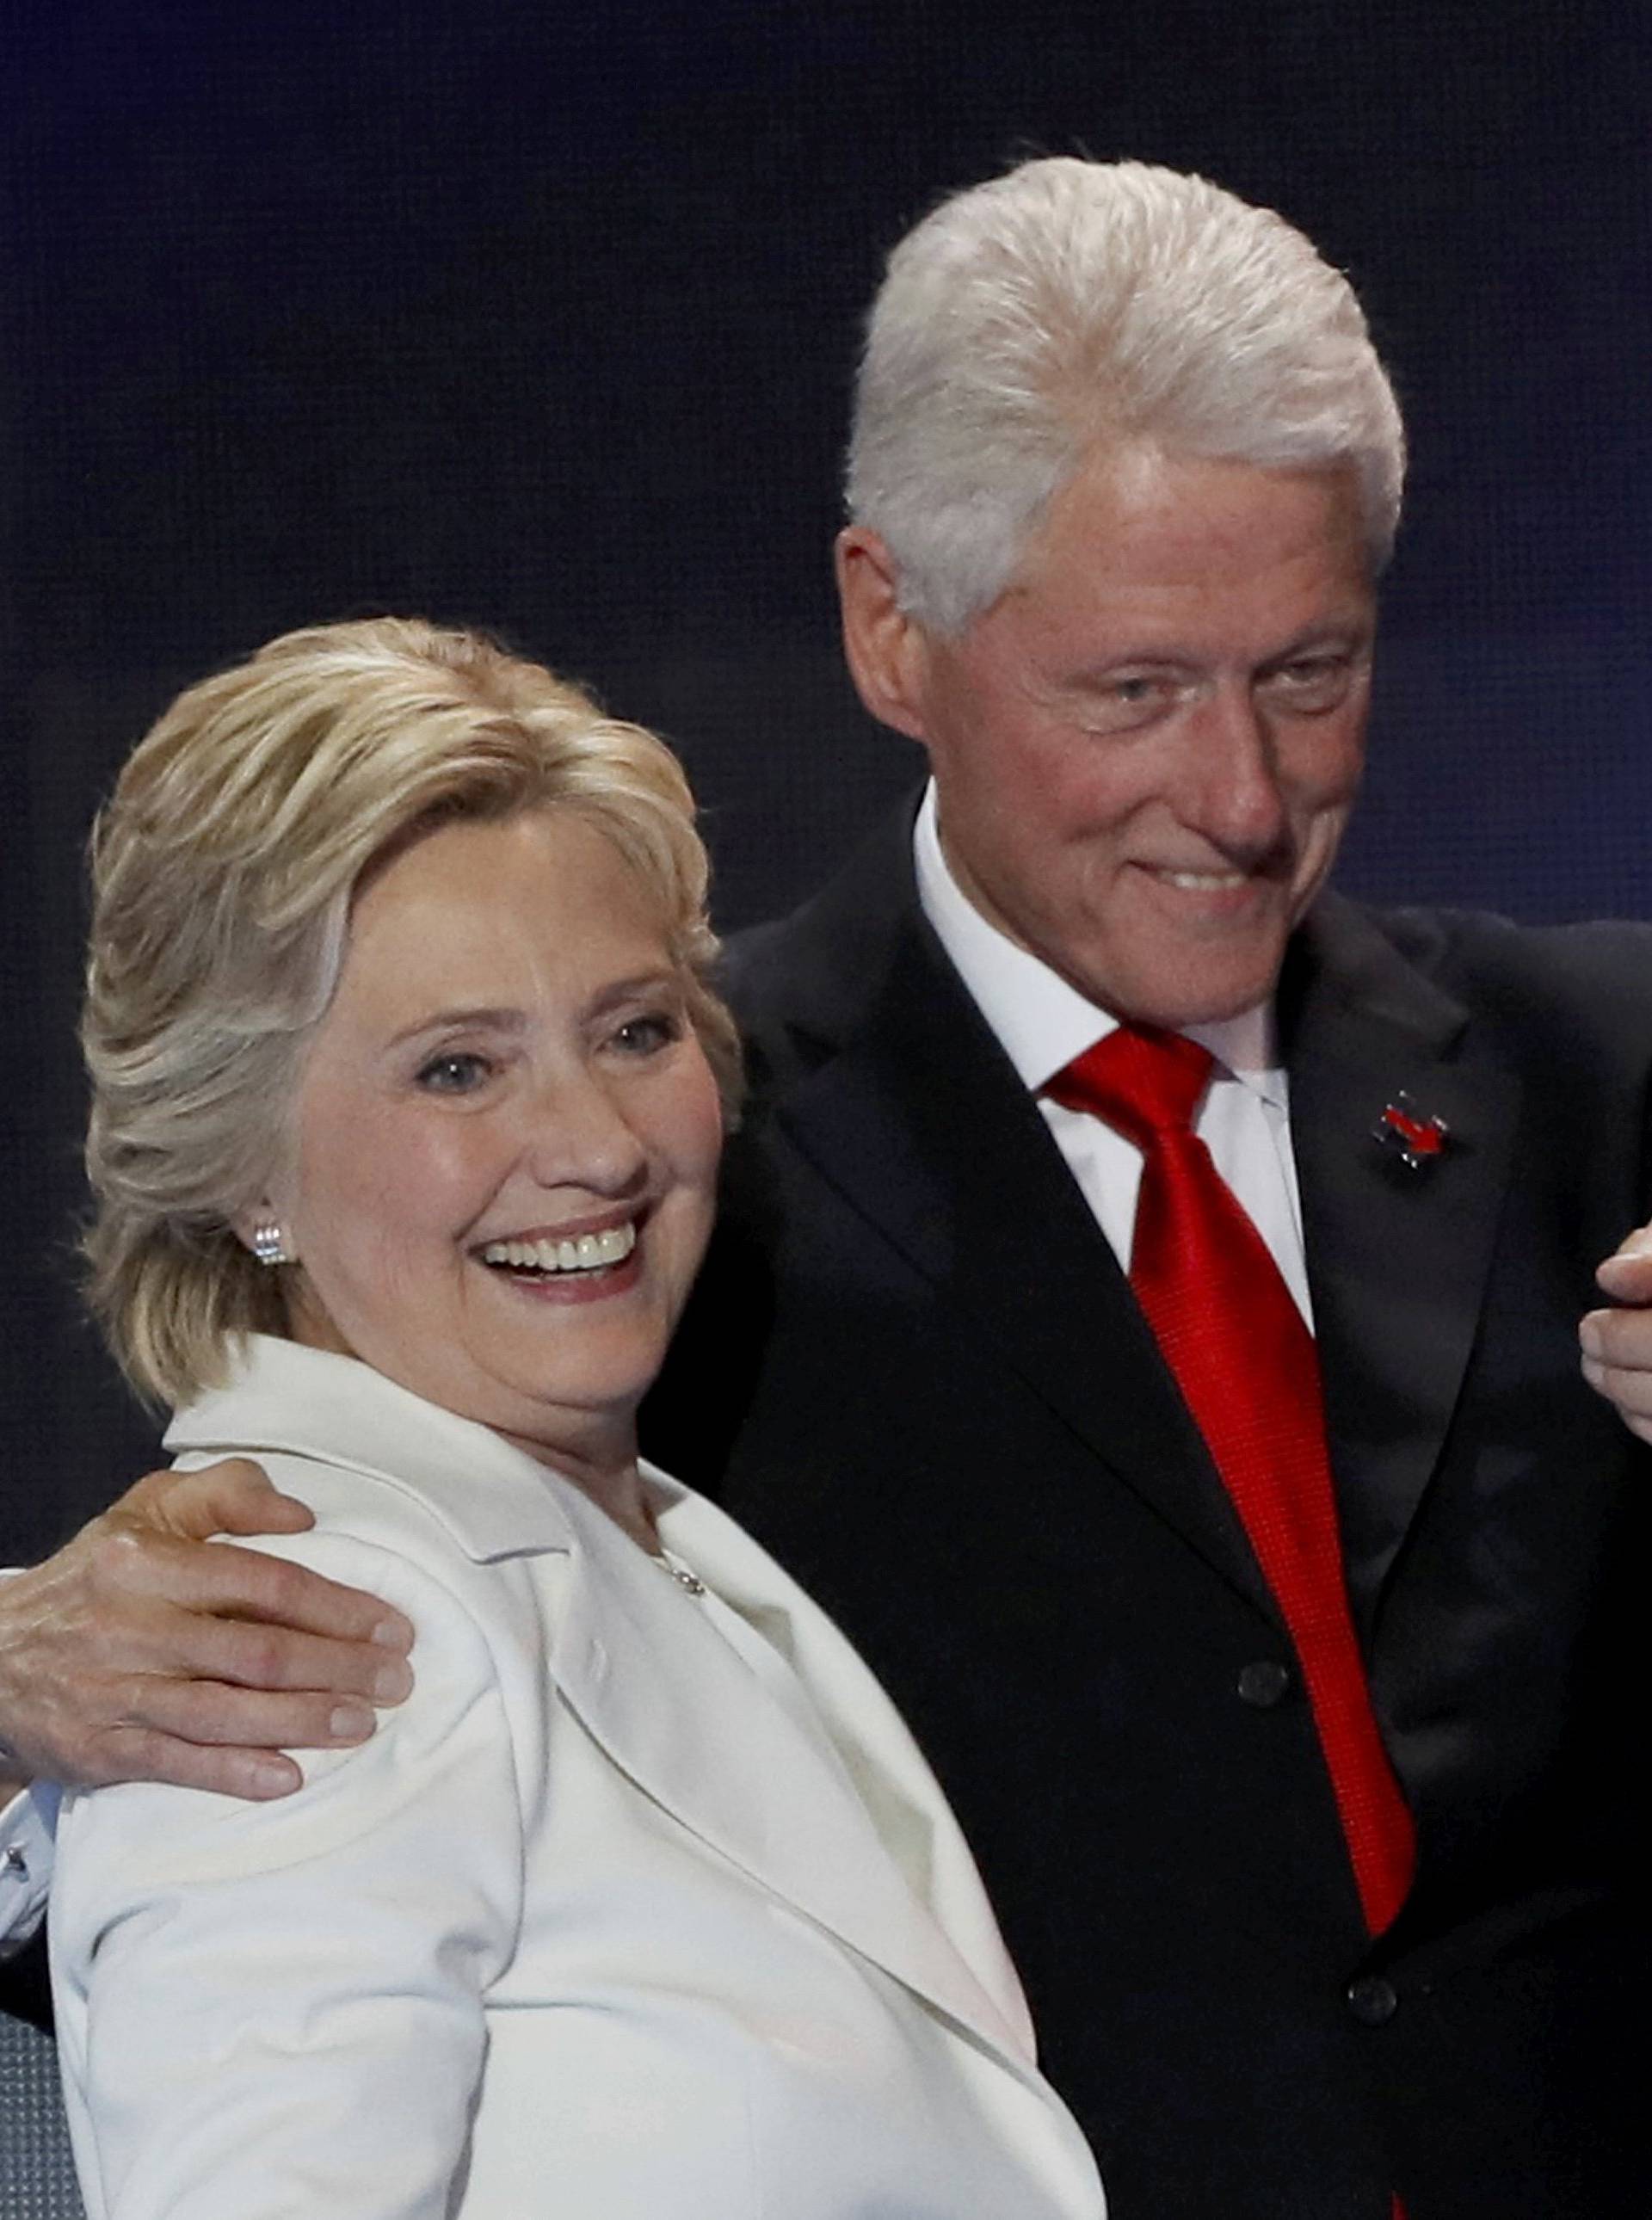 Democratic presidential nominee Hillary Clinton stands with her husband Bill Clinton after accepting the nomination on the final night of the Democratic National Convention in Philadelphia